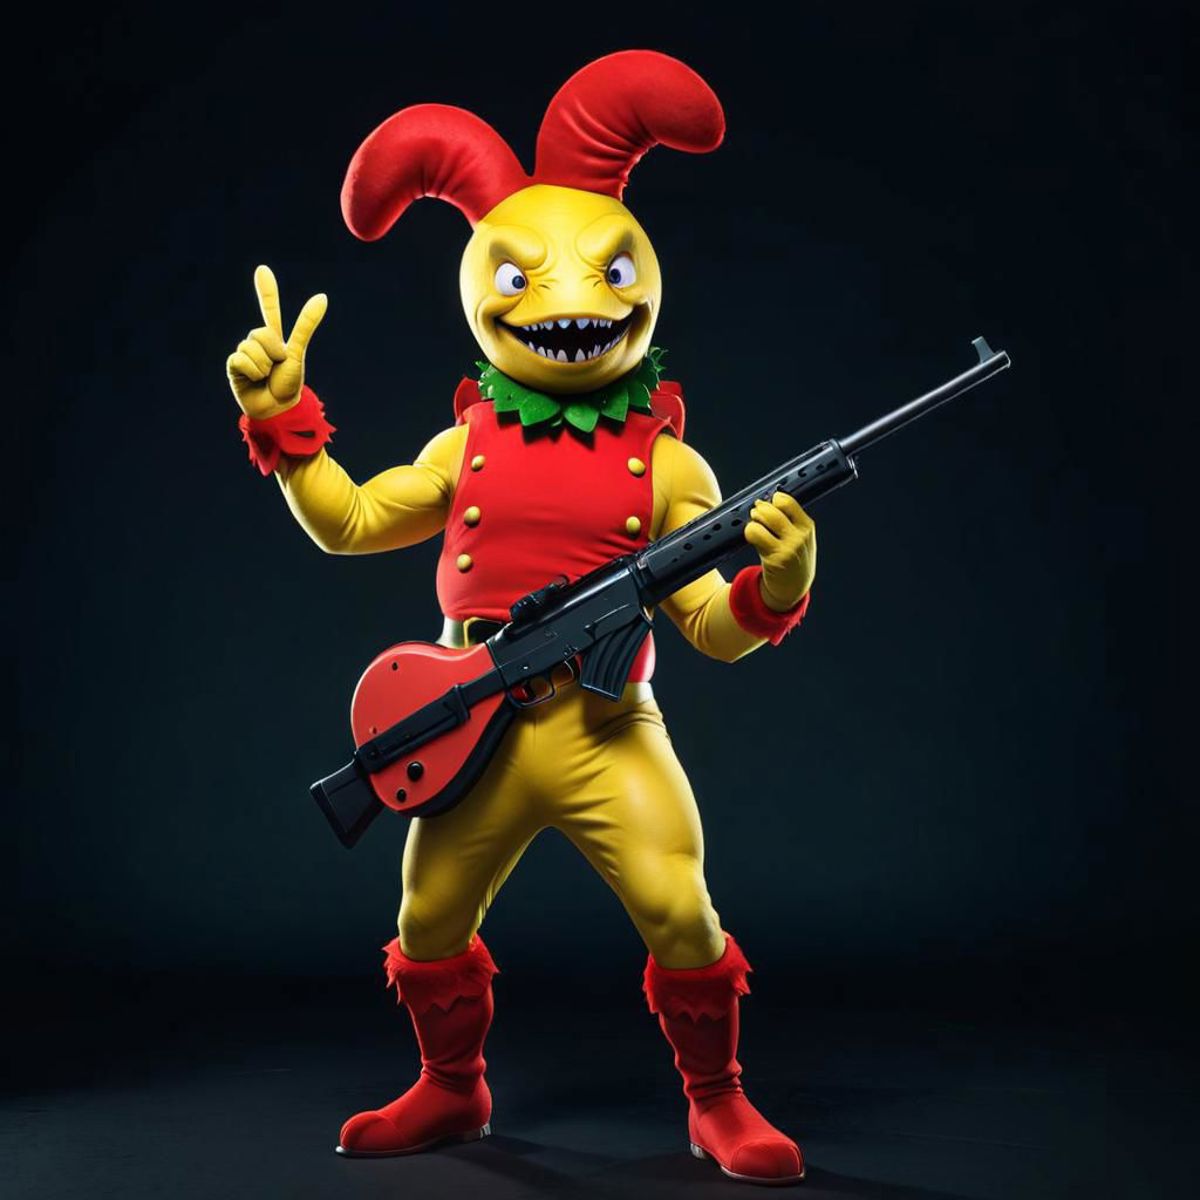 A Clown with a Gun and Peace Sign: A Scary or Funny Character?